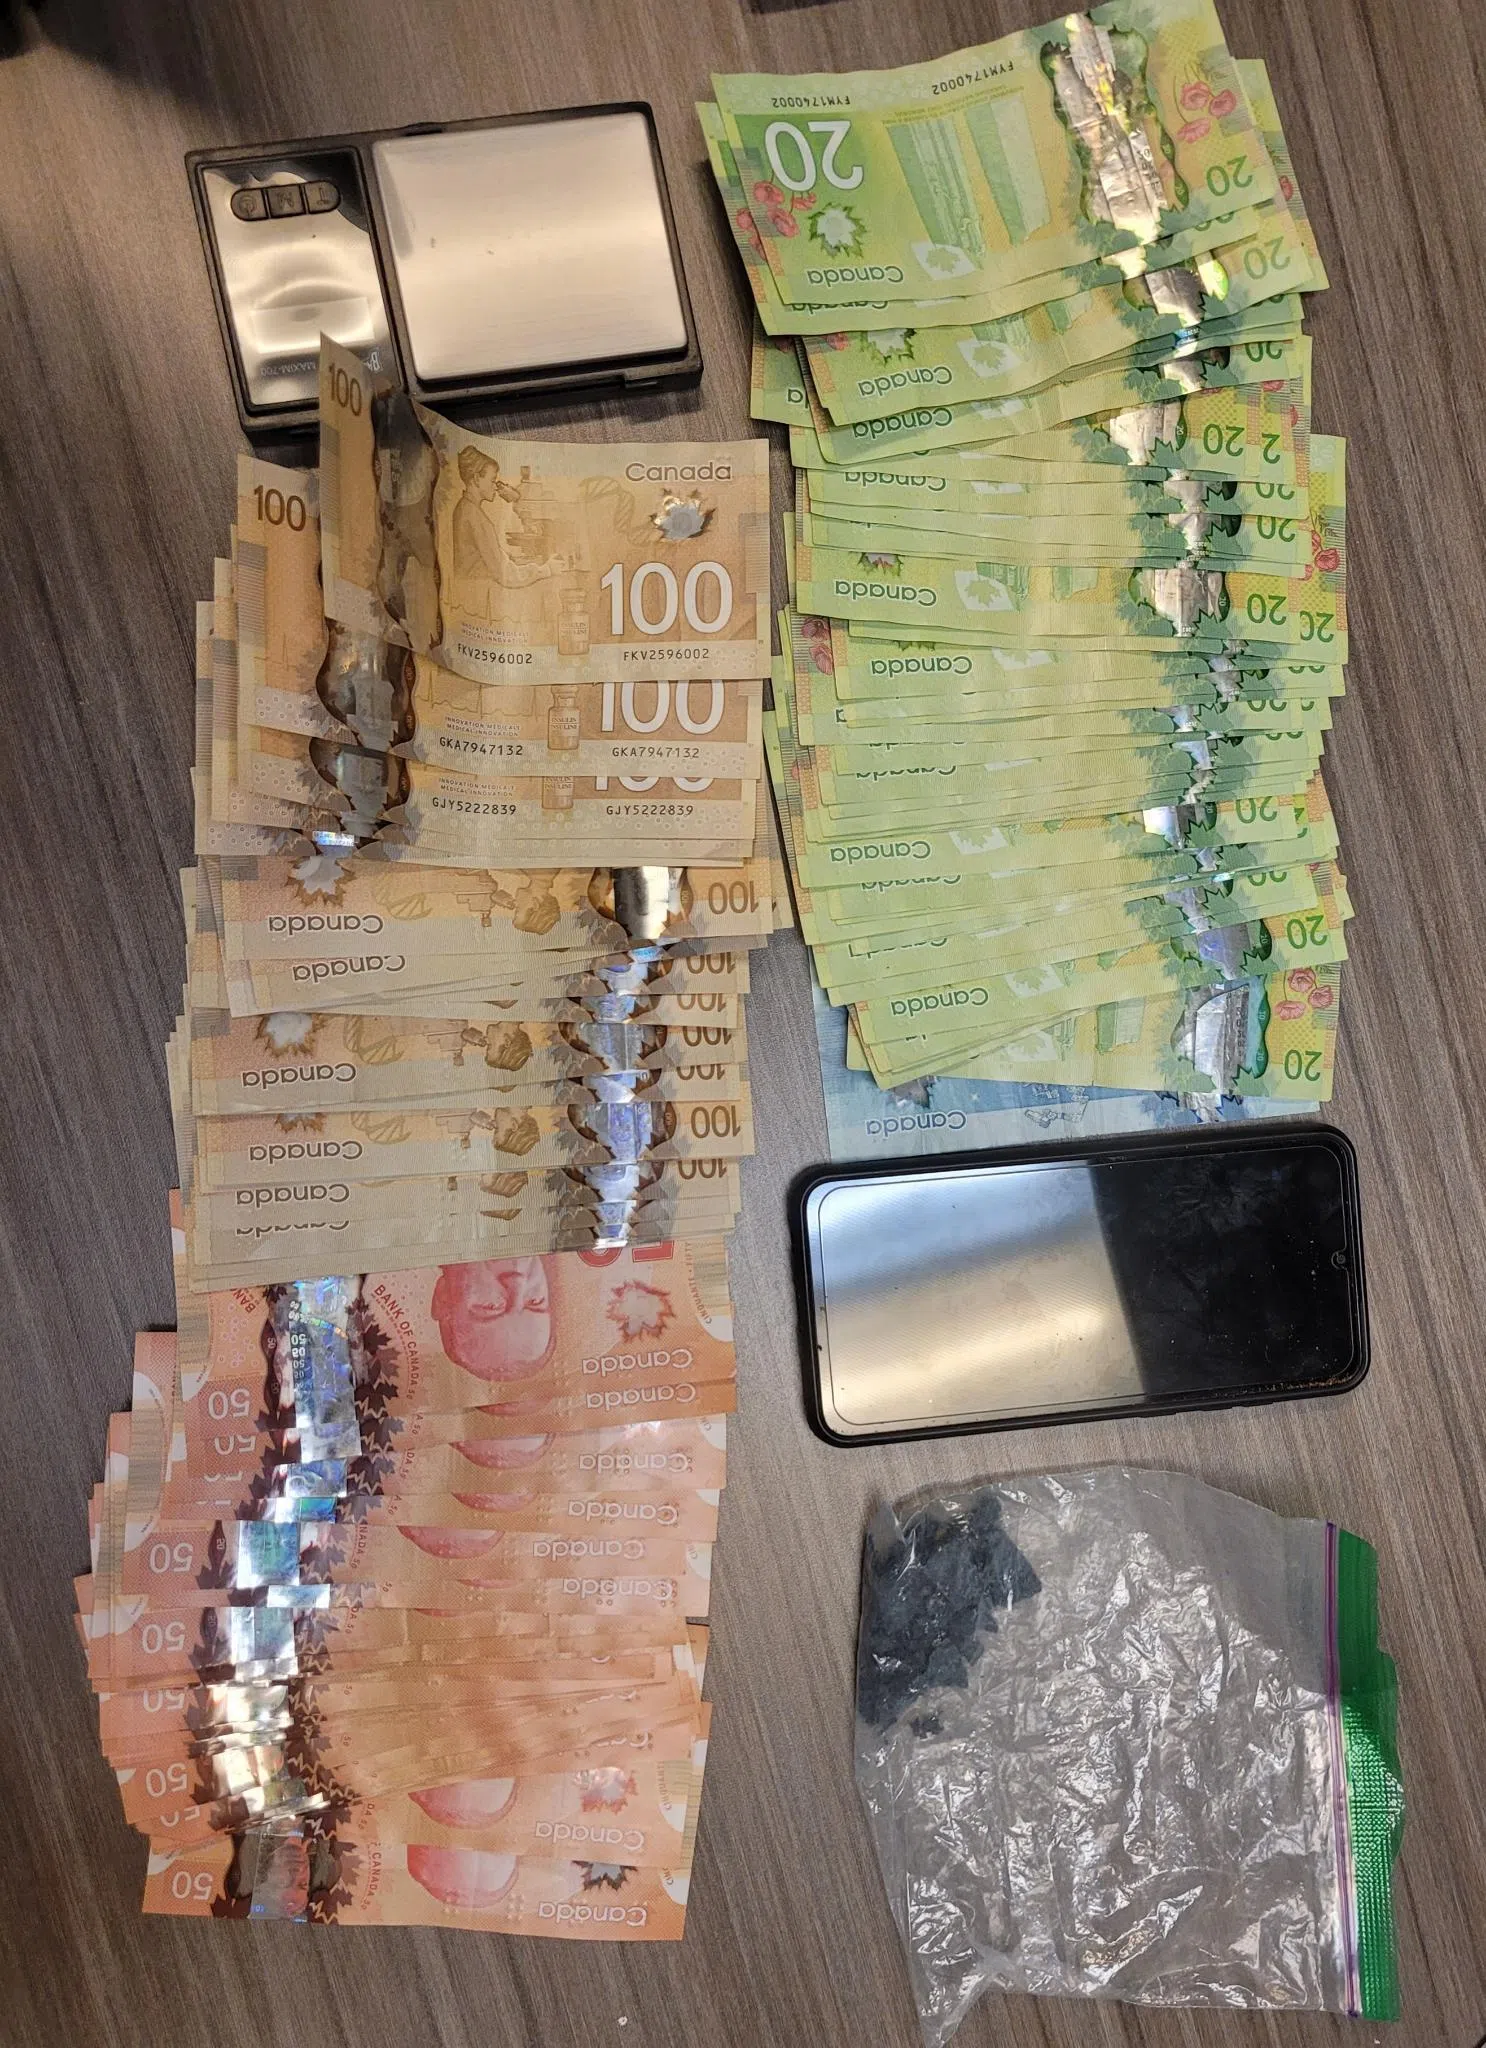 Drug and weapons seizure in Bancroft